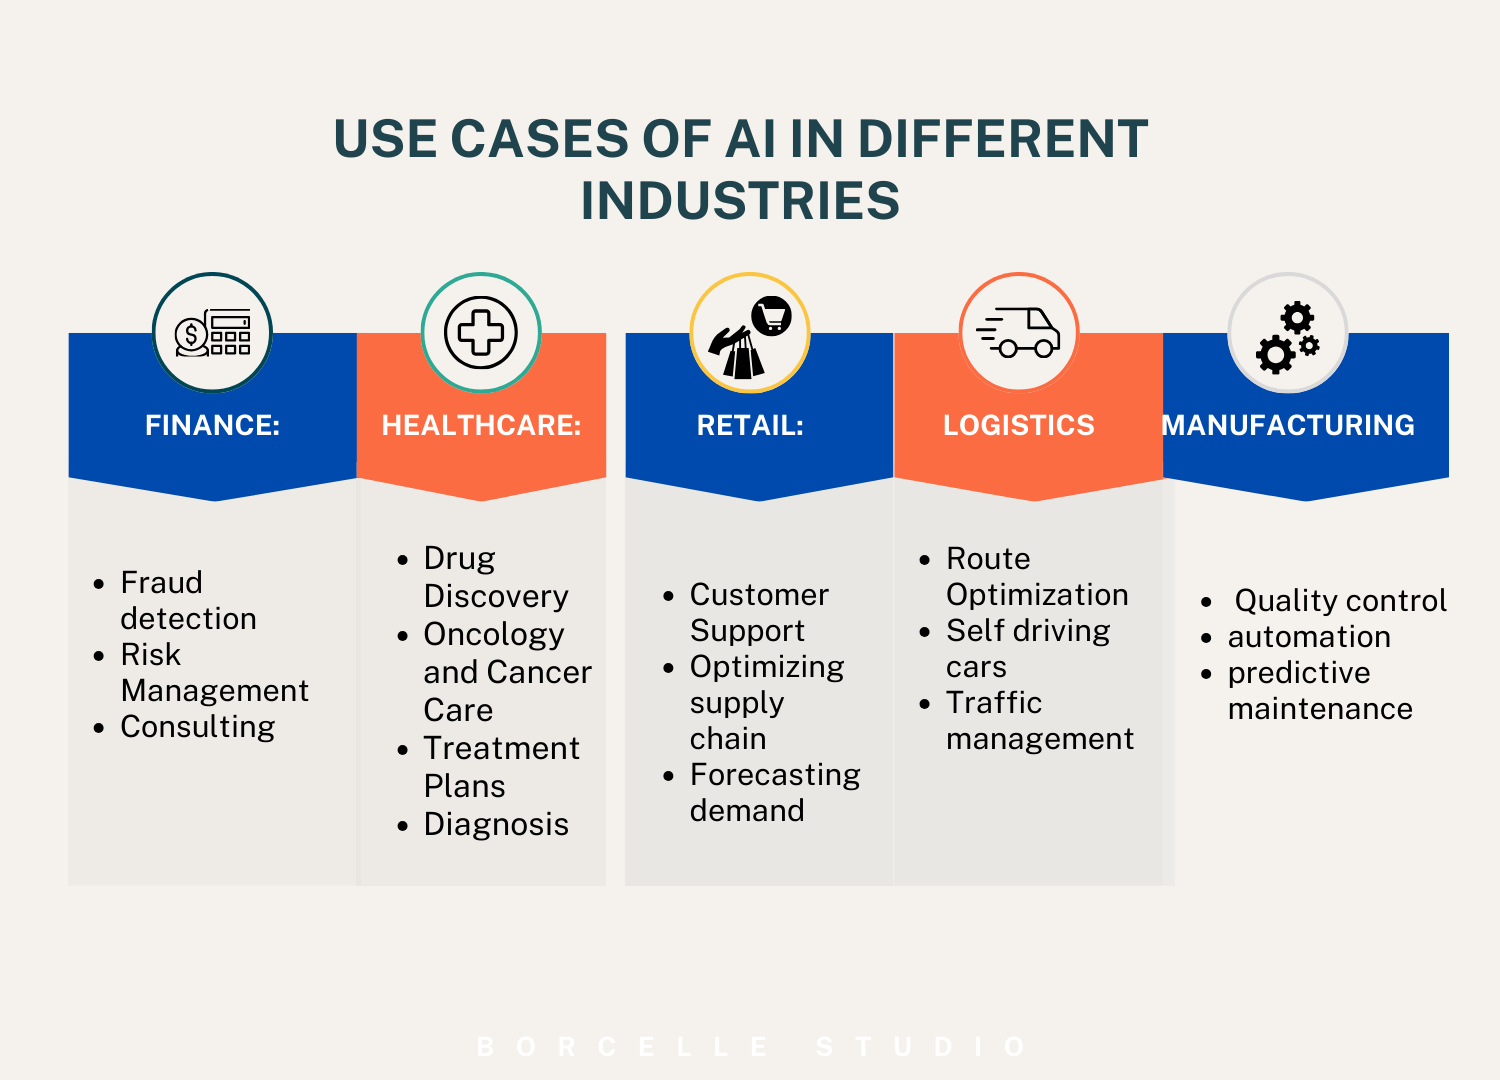 Use Cases of AI in Industries